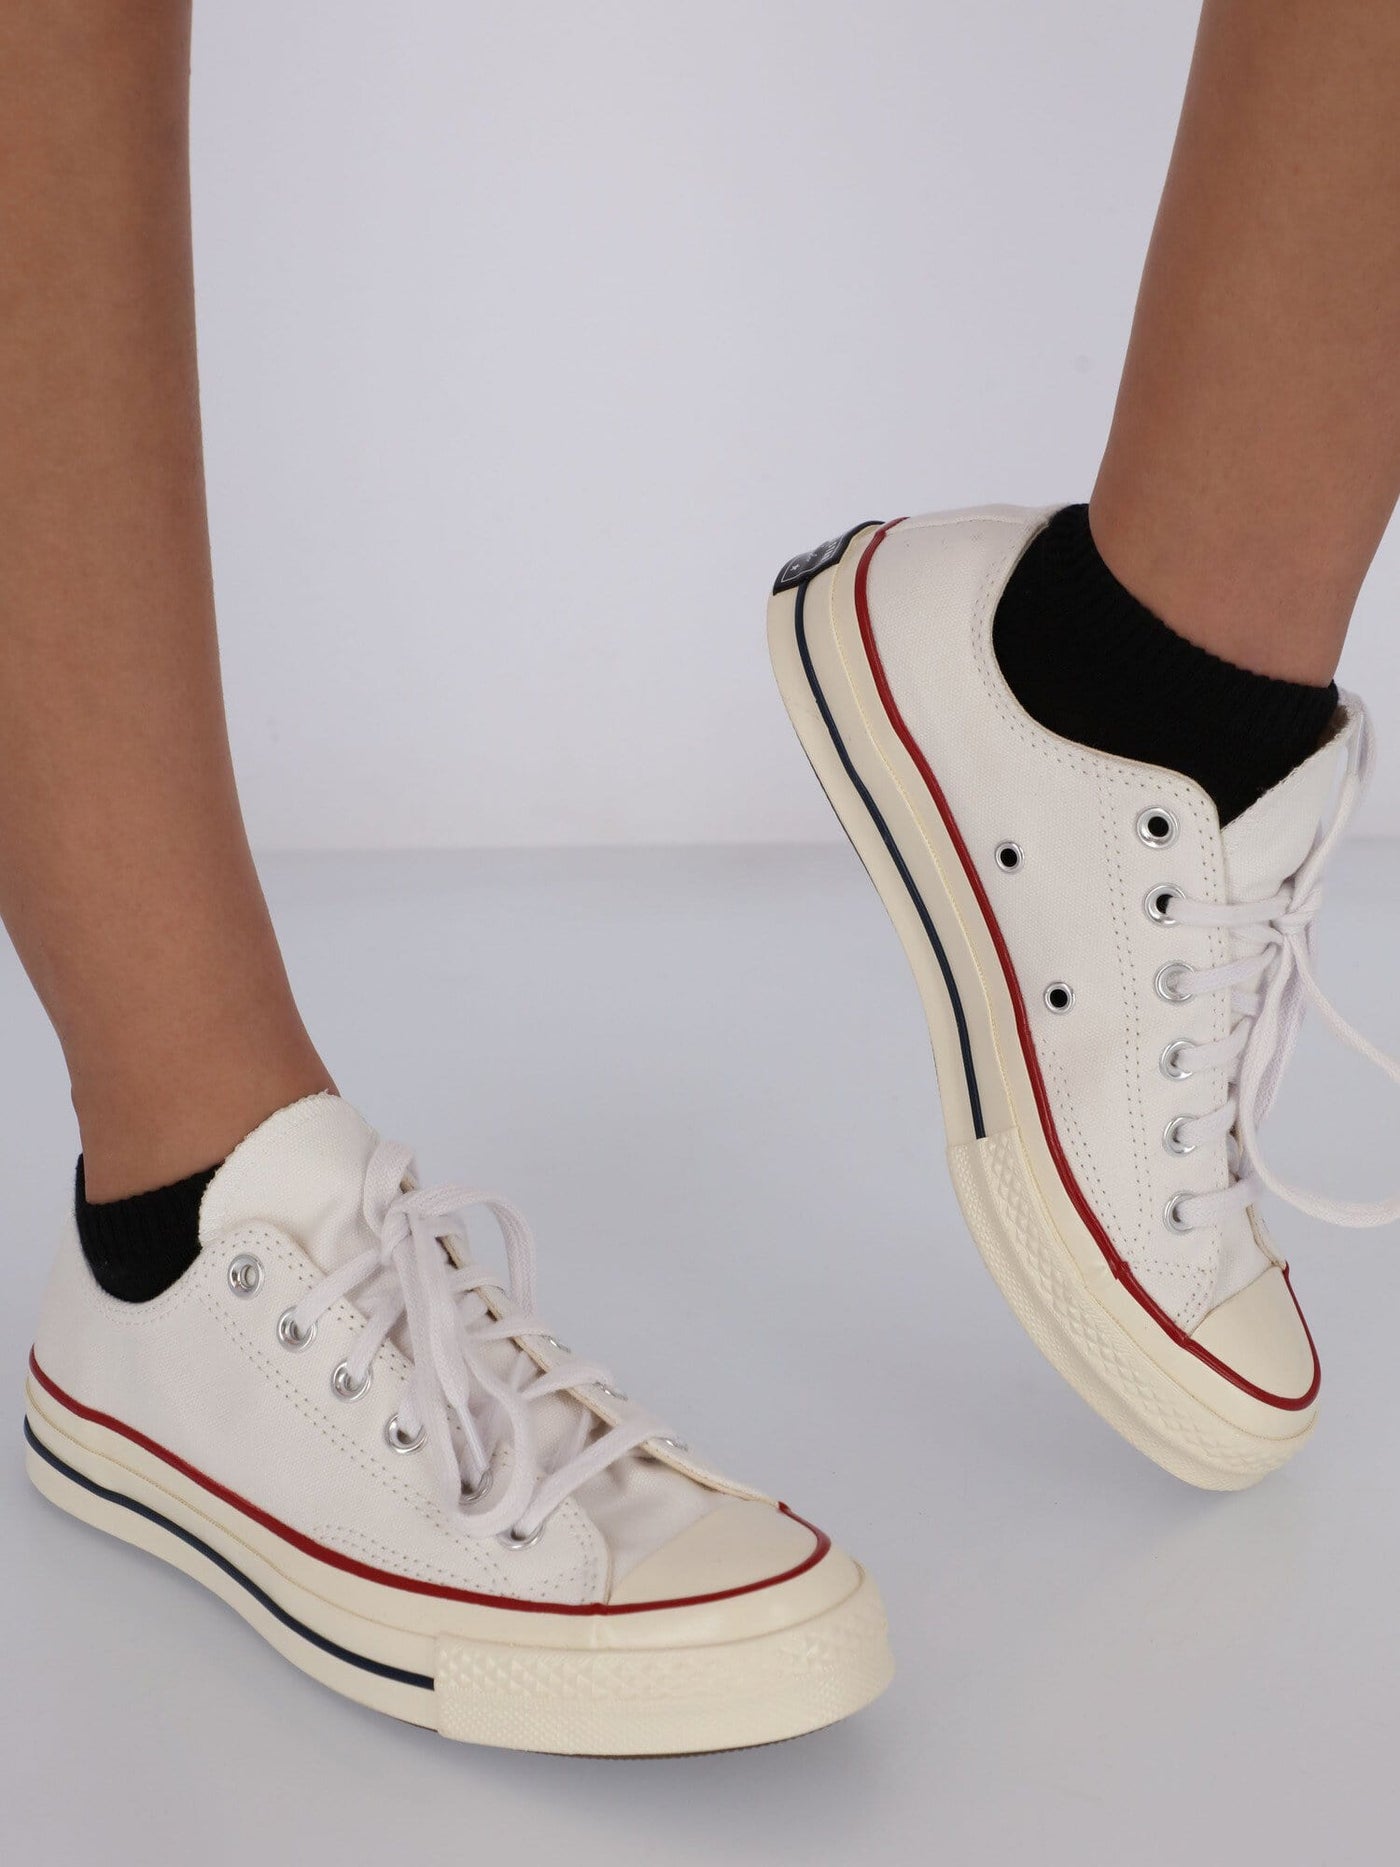 Converse Sneakers Optical White / 44 Chuck 70 Classic Low Top Women Sneakers